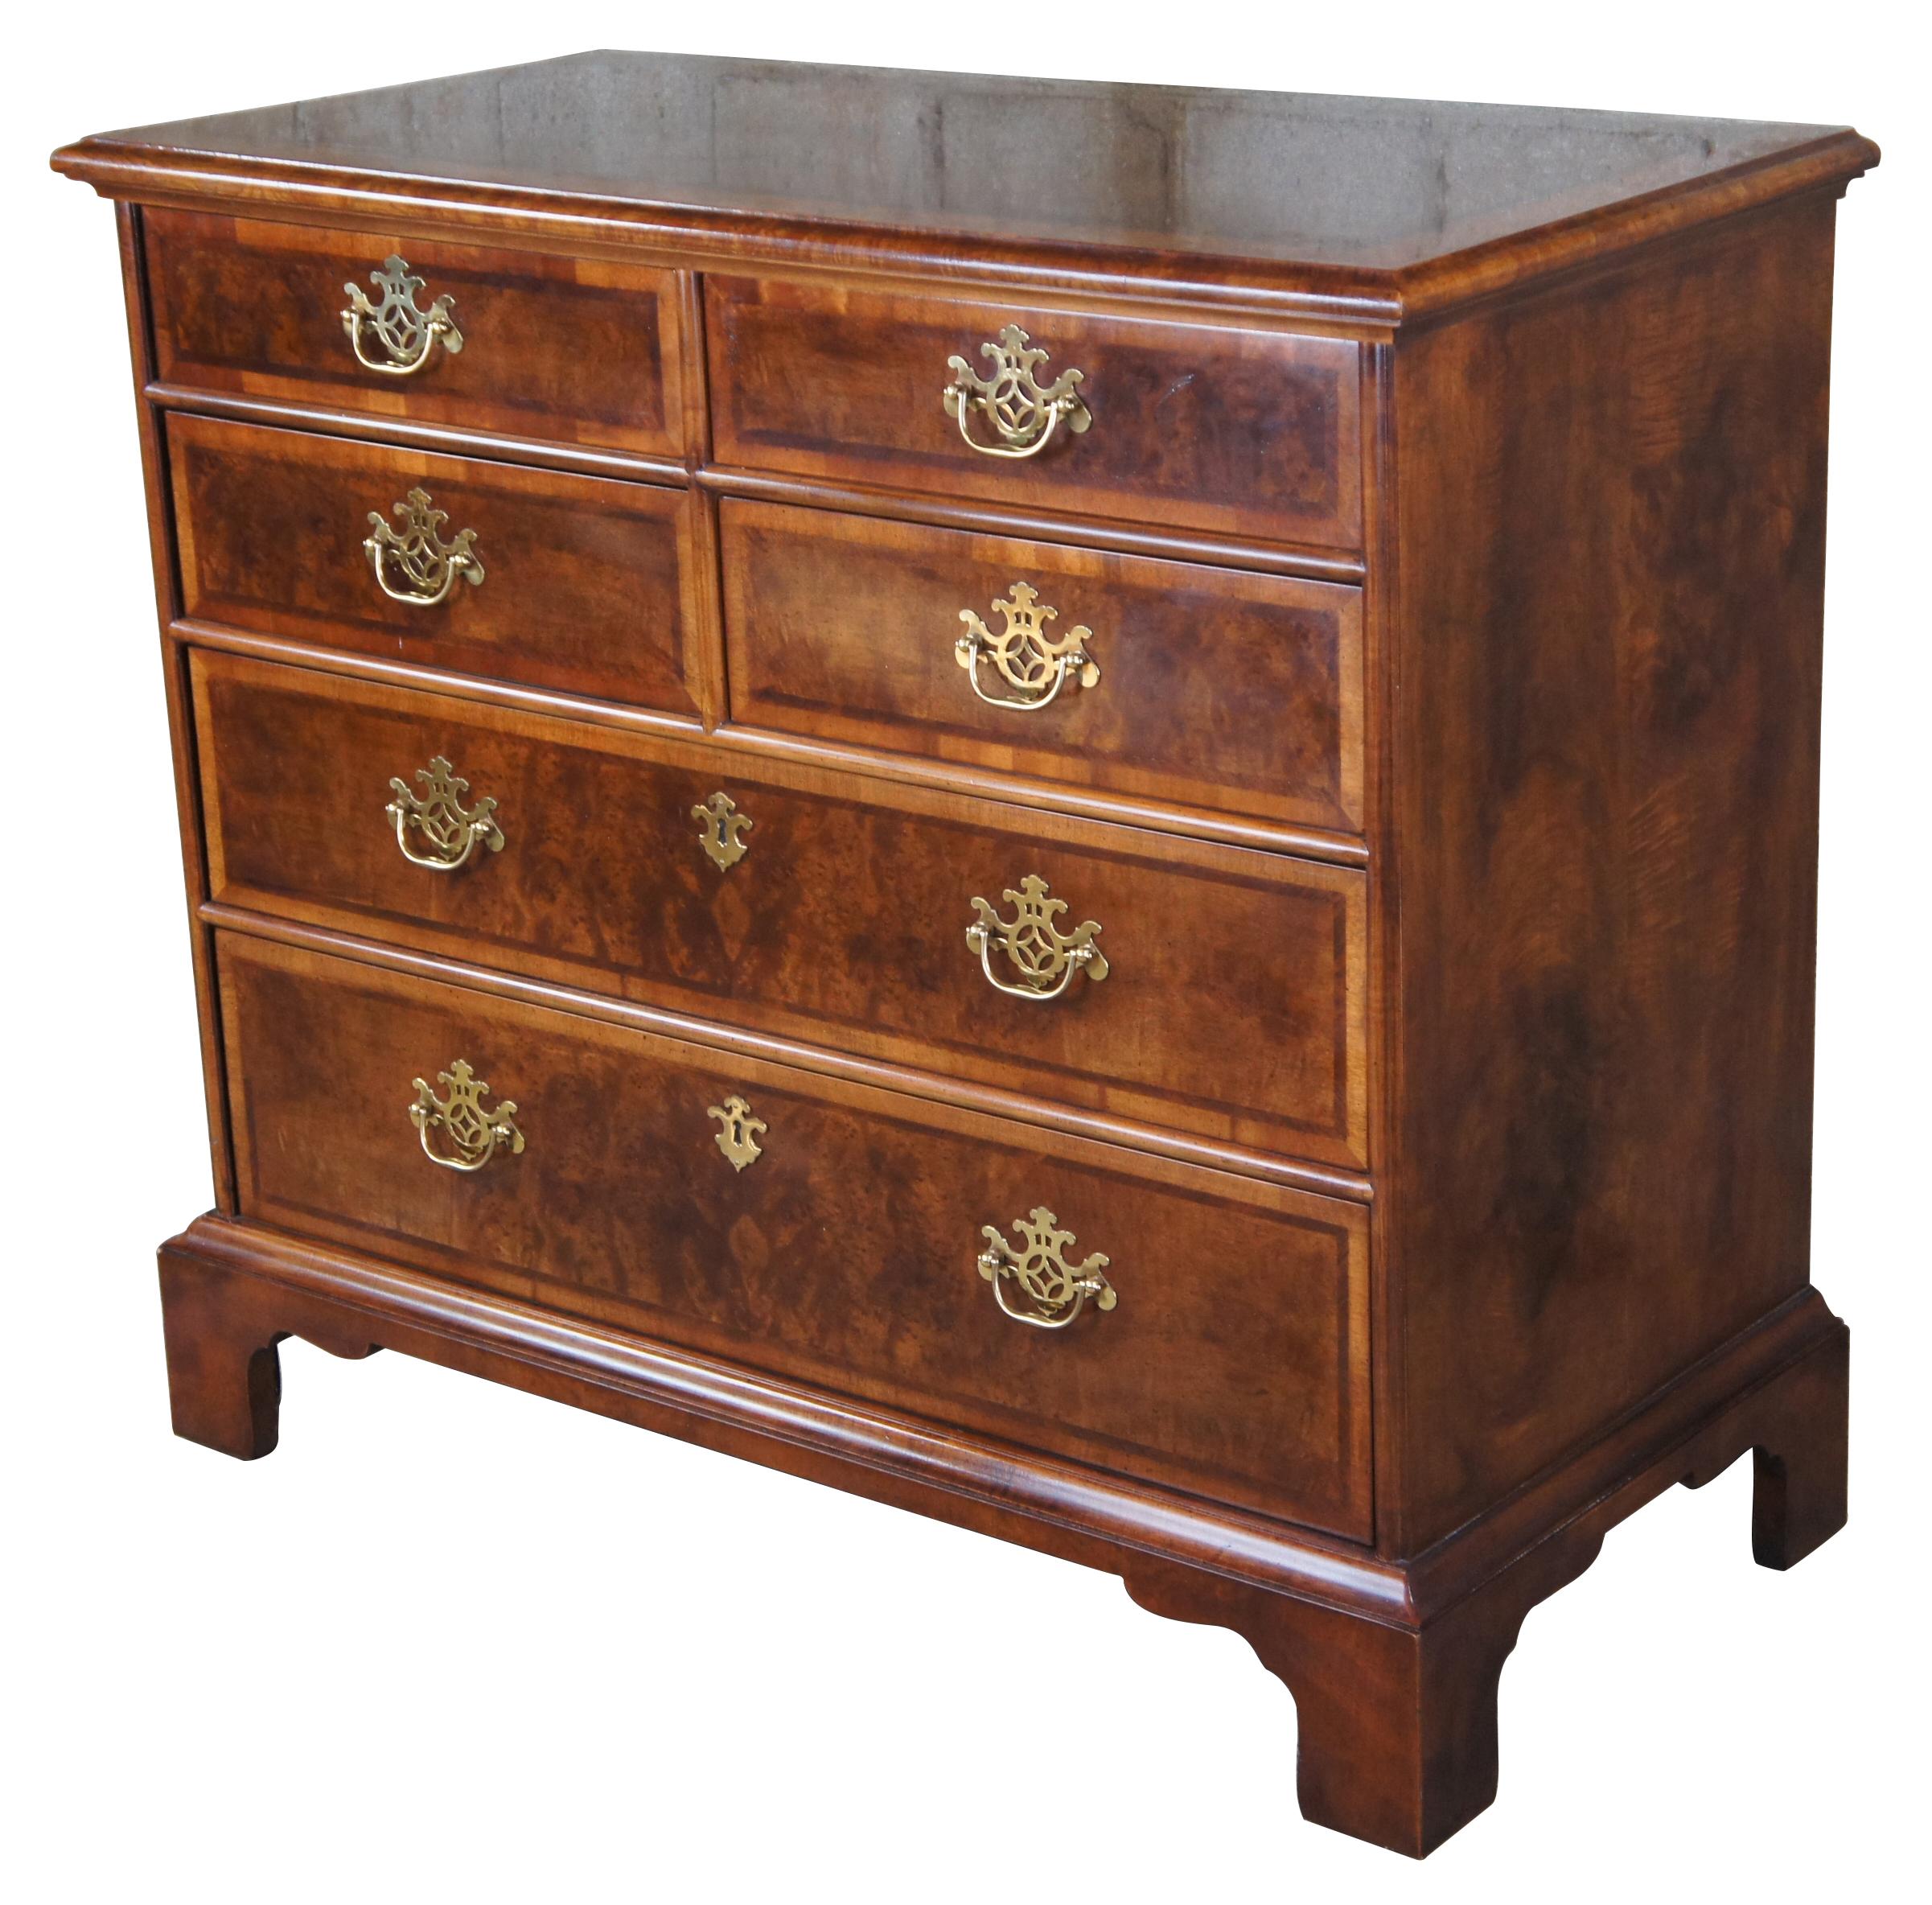 Henredon Aston Court chest of drawers. Model 9700-02, circa 1987. Made from Olive burl and banded mahogany. Features four over two dovetailed drawers with brass hardware. The chest is supported by bracket feet. Draws inspiration from Chippendale and